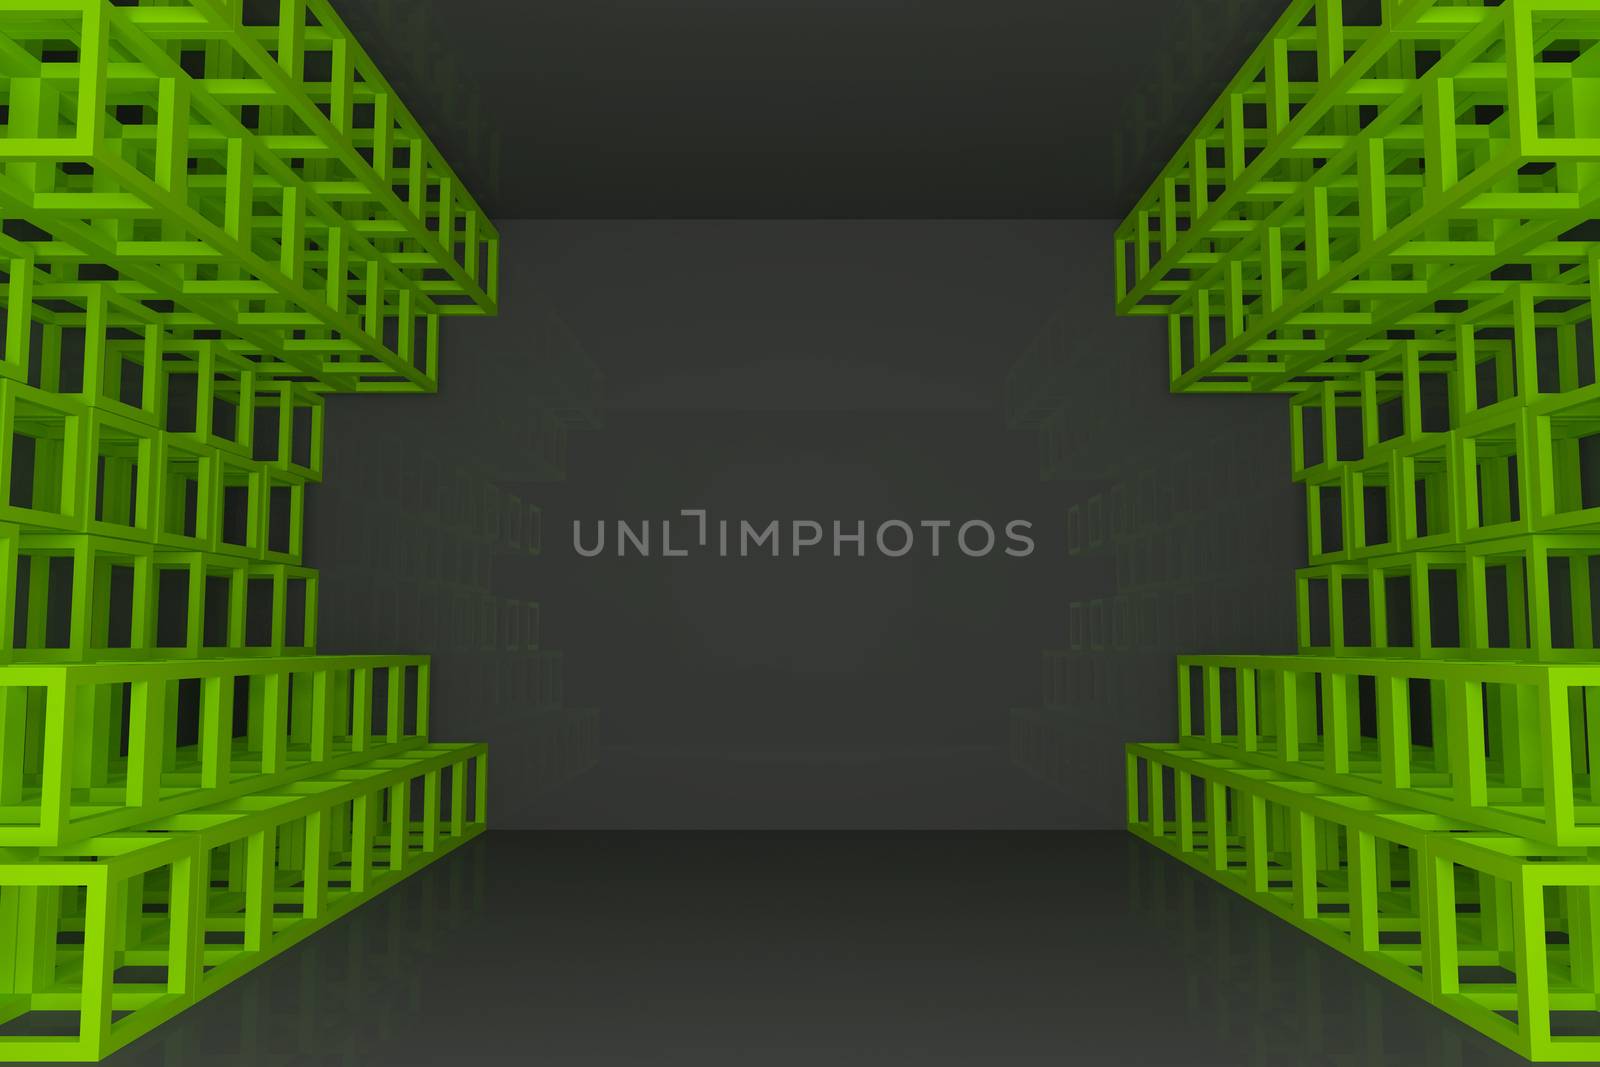 Abstract green square truss wall with empty room